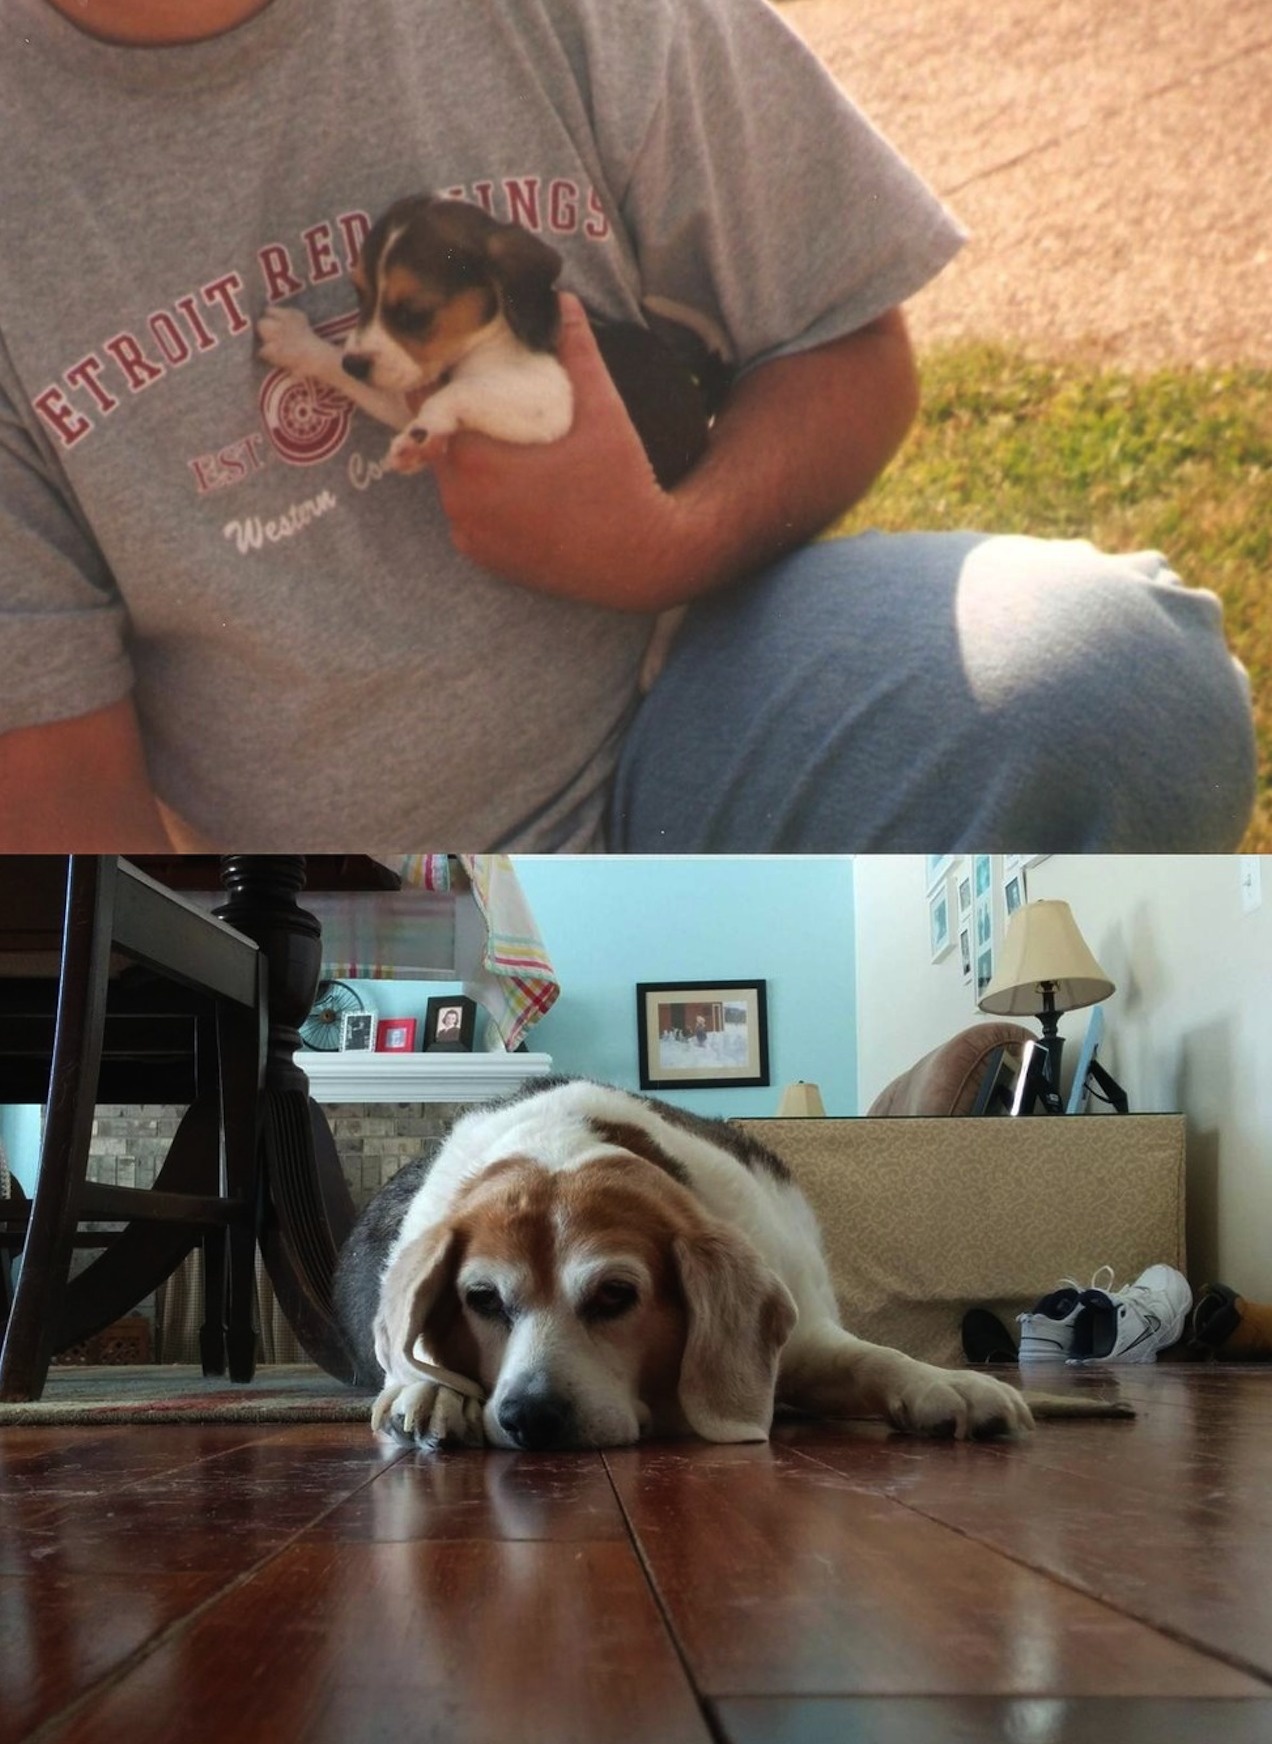 "The first and last photos of my best friend."